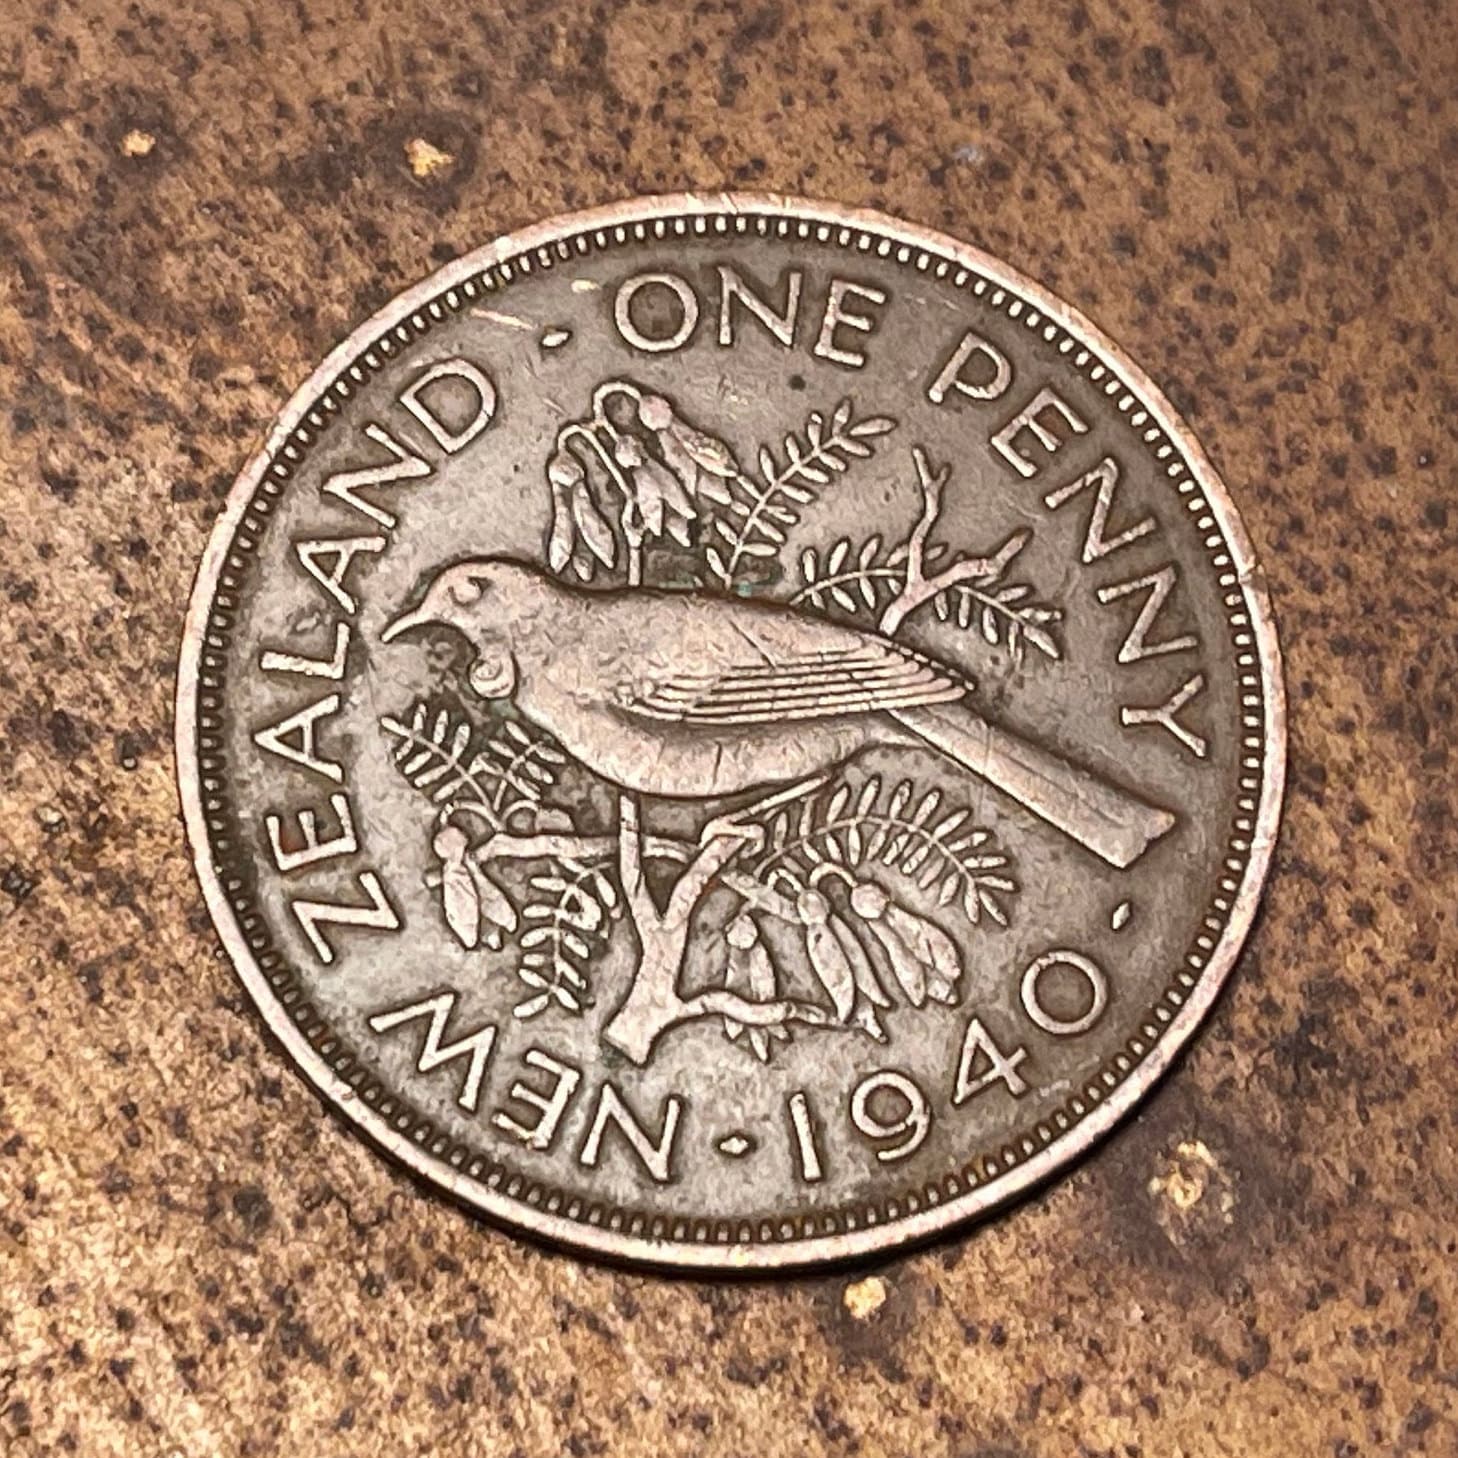 Tui Bird & King George VI 1 Penny New Zealand Authentic Coin Money for Jewelry and Craft Making (Maori) (Talking Bird) (Kowhai)